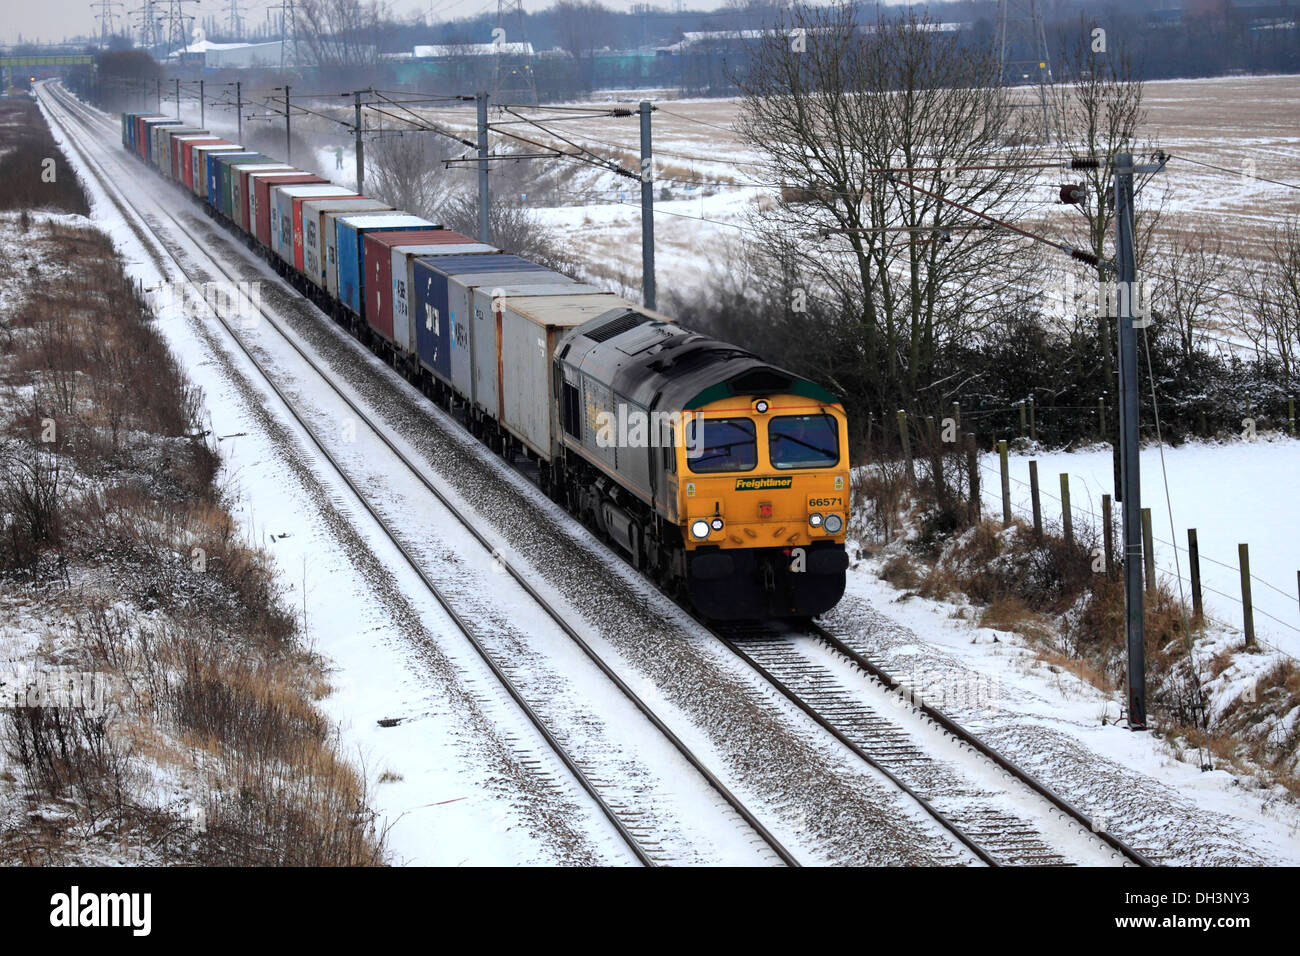 Freightliner trains 66571 Diesel Powered Freight Train, pulling containers, East Coast Main Line Railway, Cambridgeshire England Stock Photo